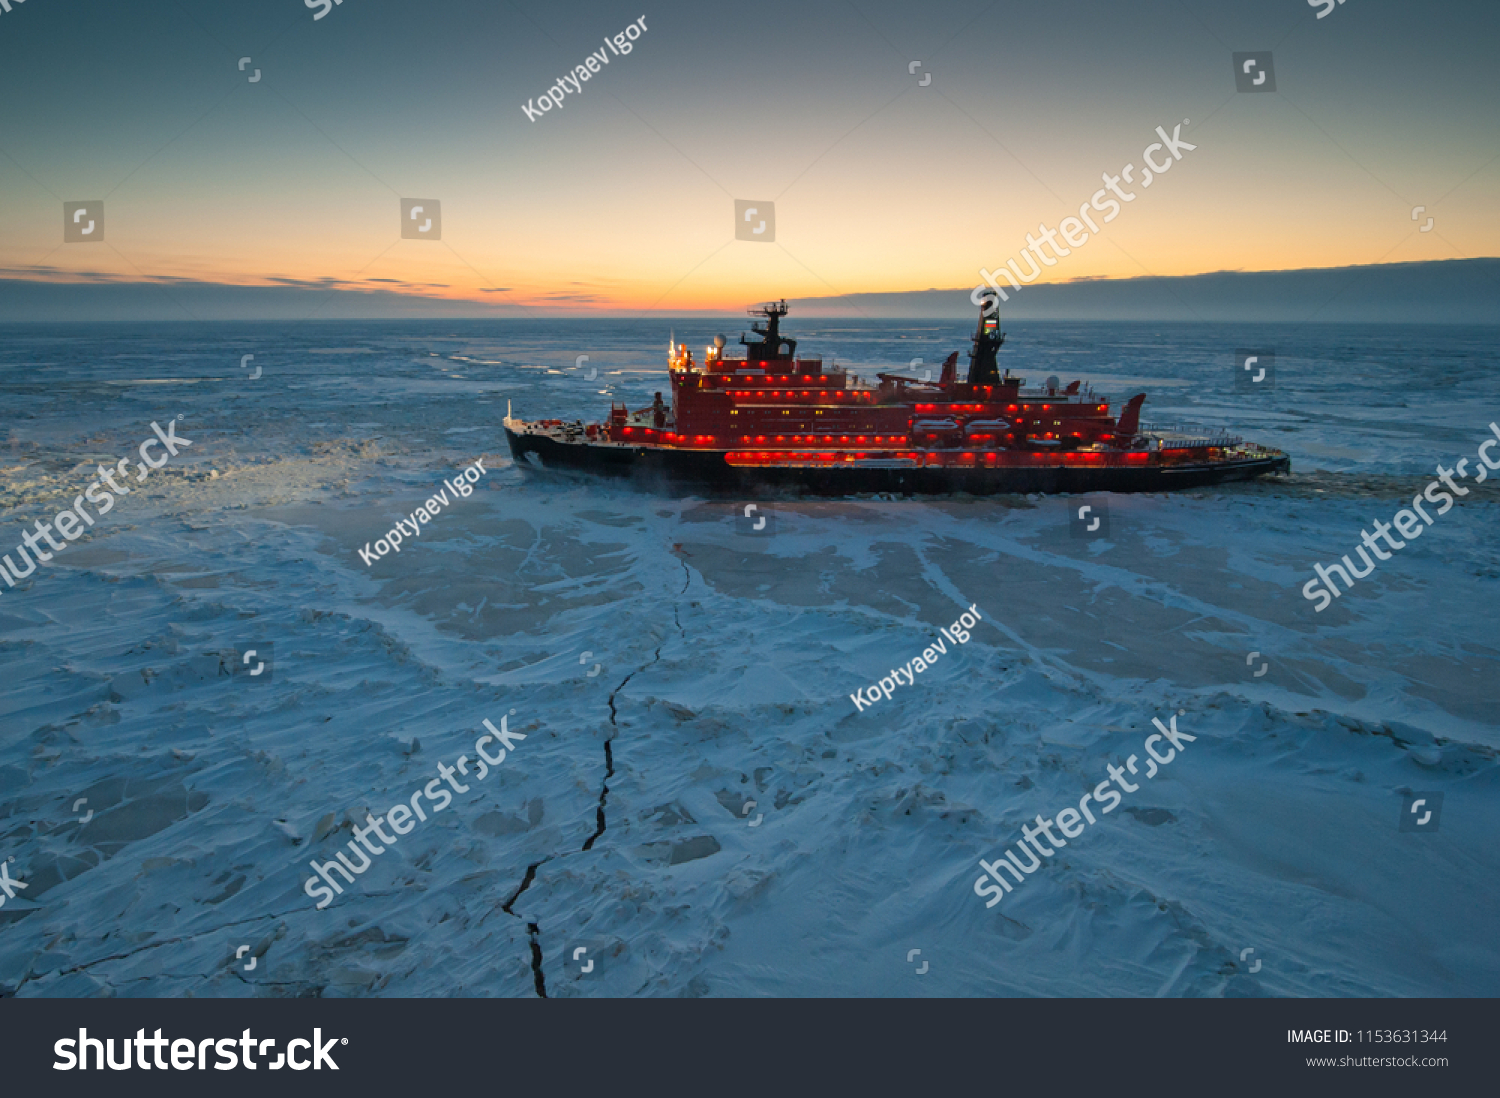 Icebreaking vessel in Arctic with background of sunset #1153631344